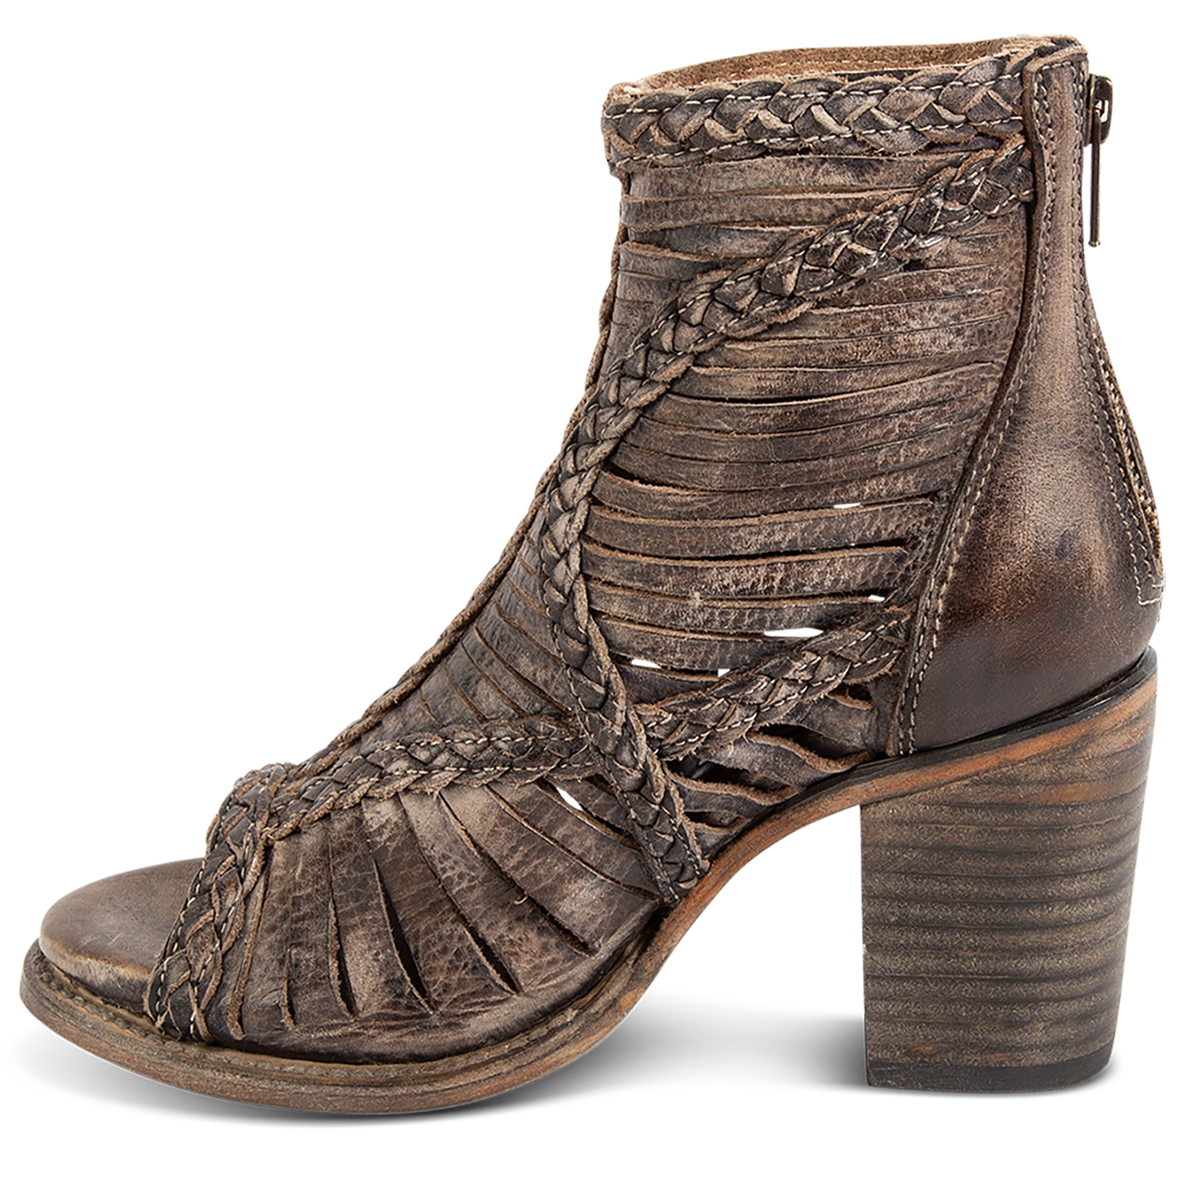 Inside view showing laser cut leather, detailed braided accents and a stacked heel on FREEBIRD women's Bela black distressed leather sandal